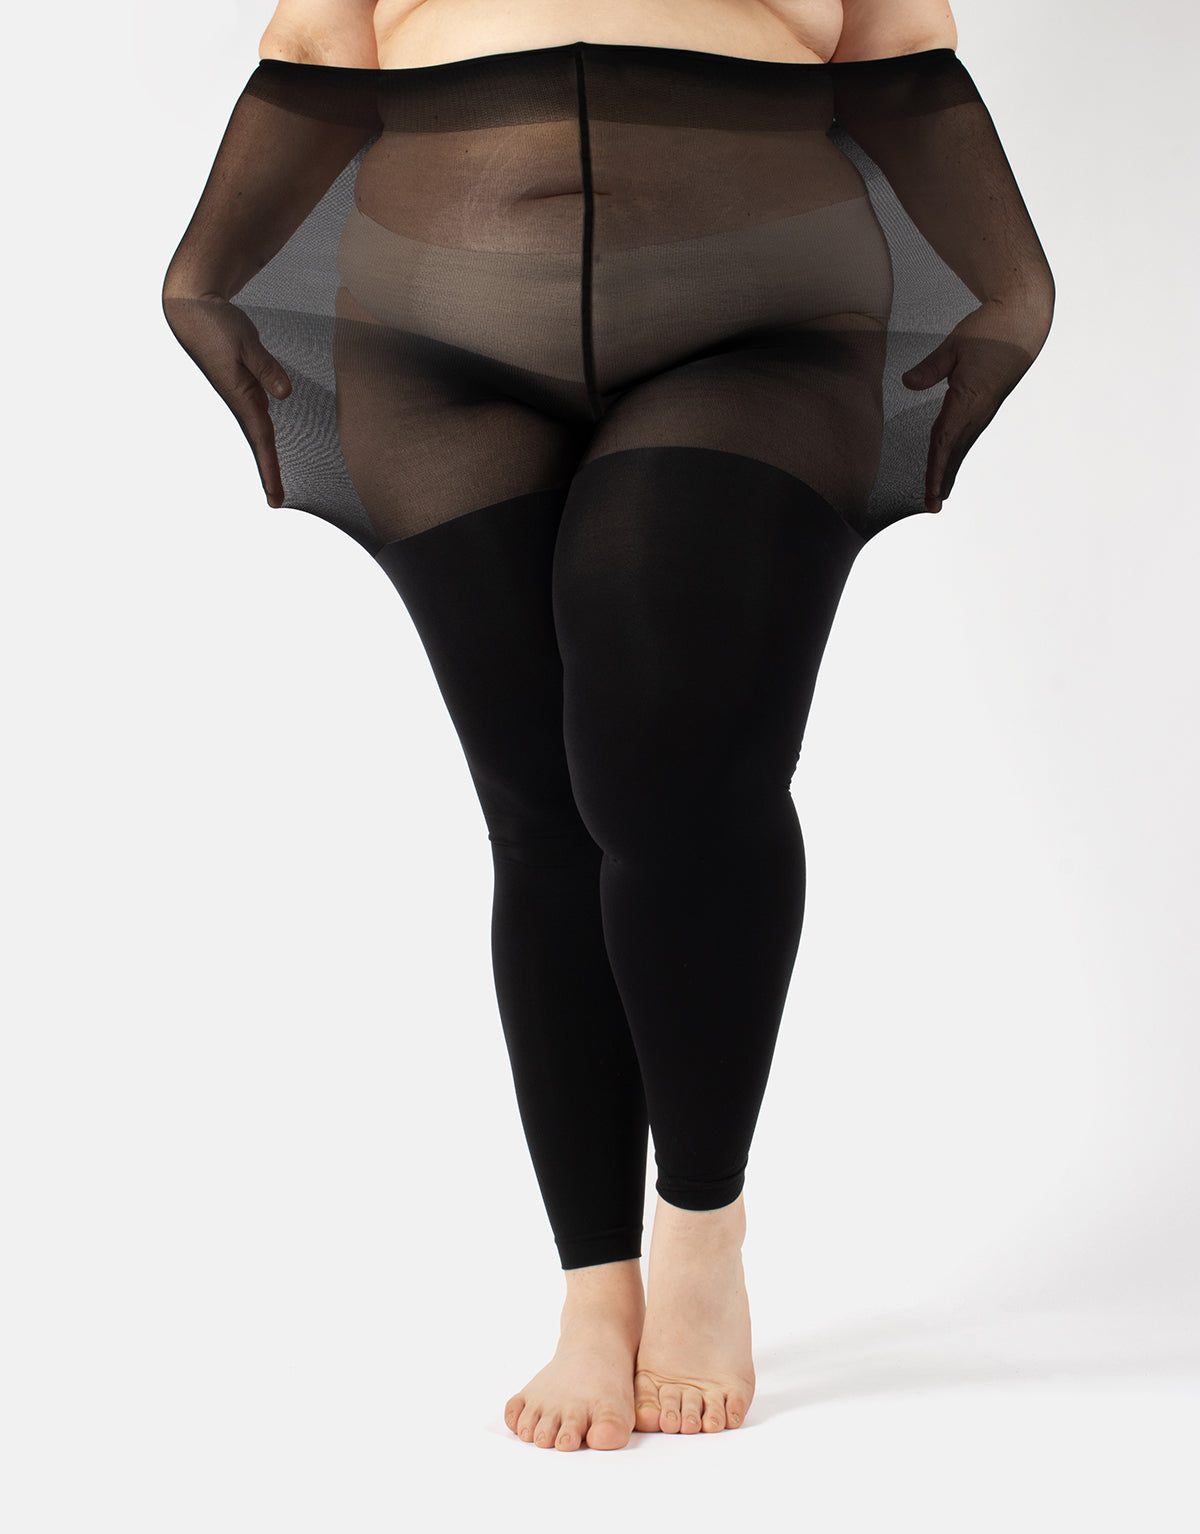 Calzitaly Curvy Footless Tights - 100 Denier black plain opaque plus size footless tights with a sheer super elasticated boxer top, anti-chafing panels, flat seams and cotton gusset.